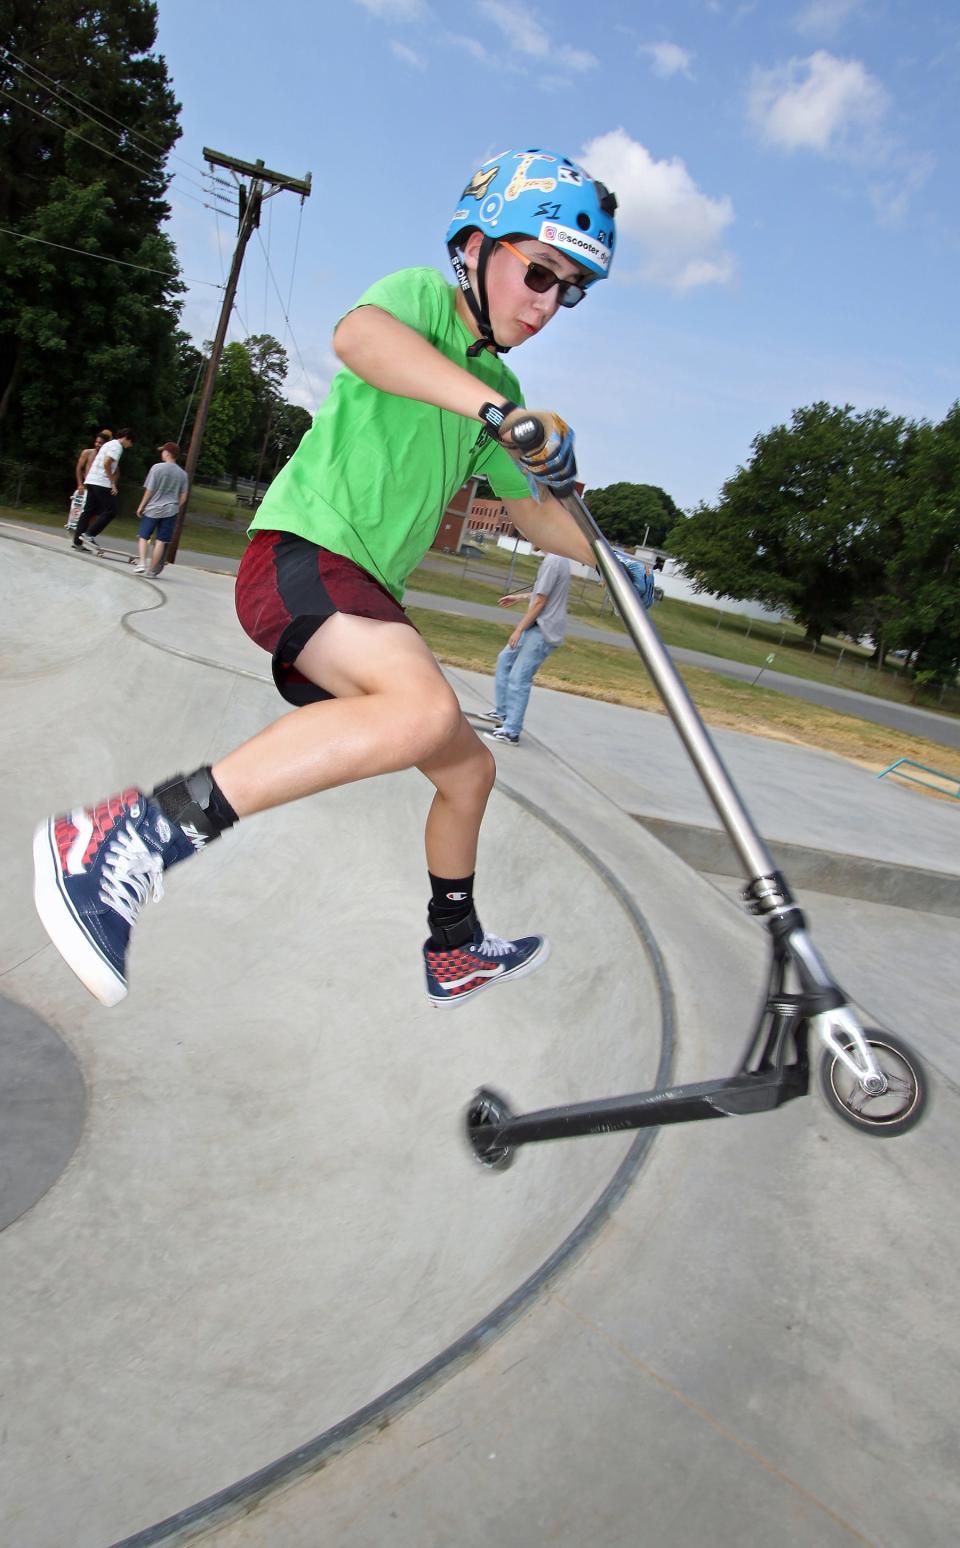 Dylan Messina and his scooter try out the new Belmont Skateboard Park on East Catawba Street during the skate park expo held Saturday, June 25, 2022.